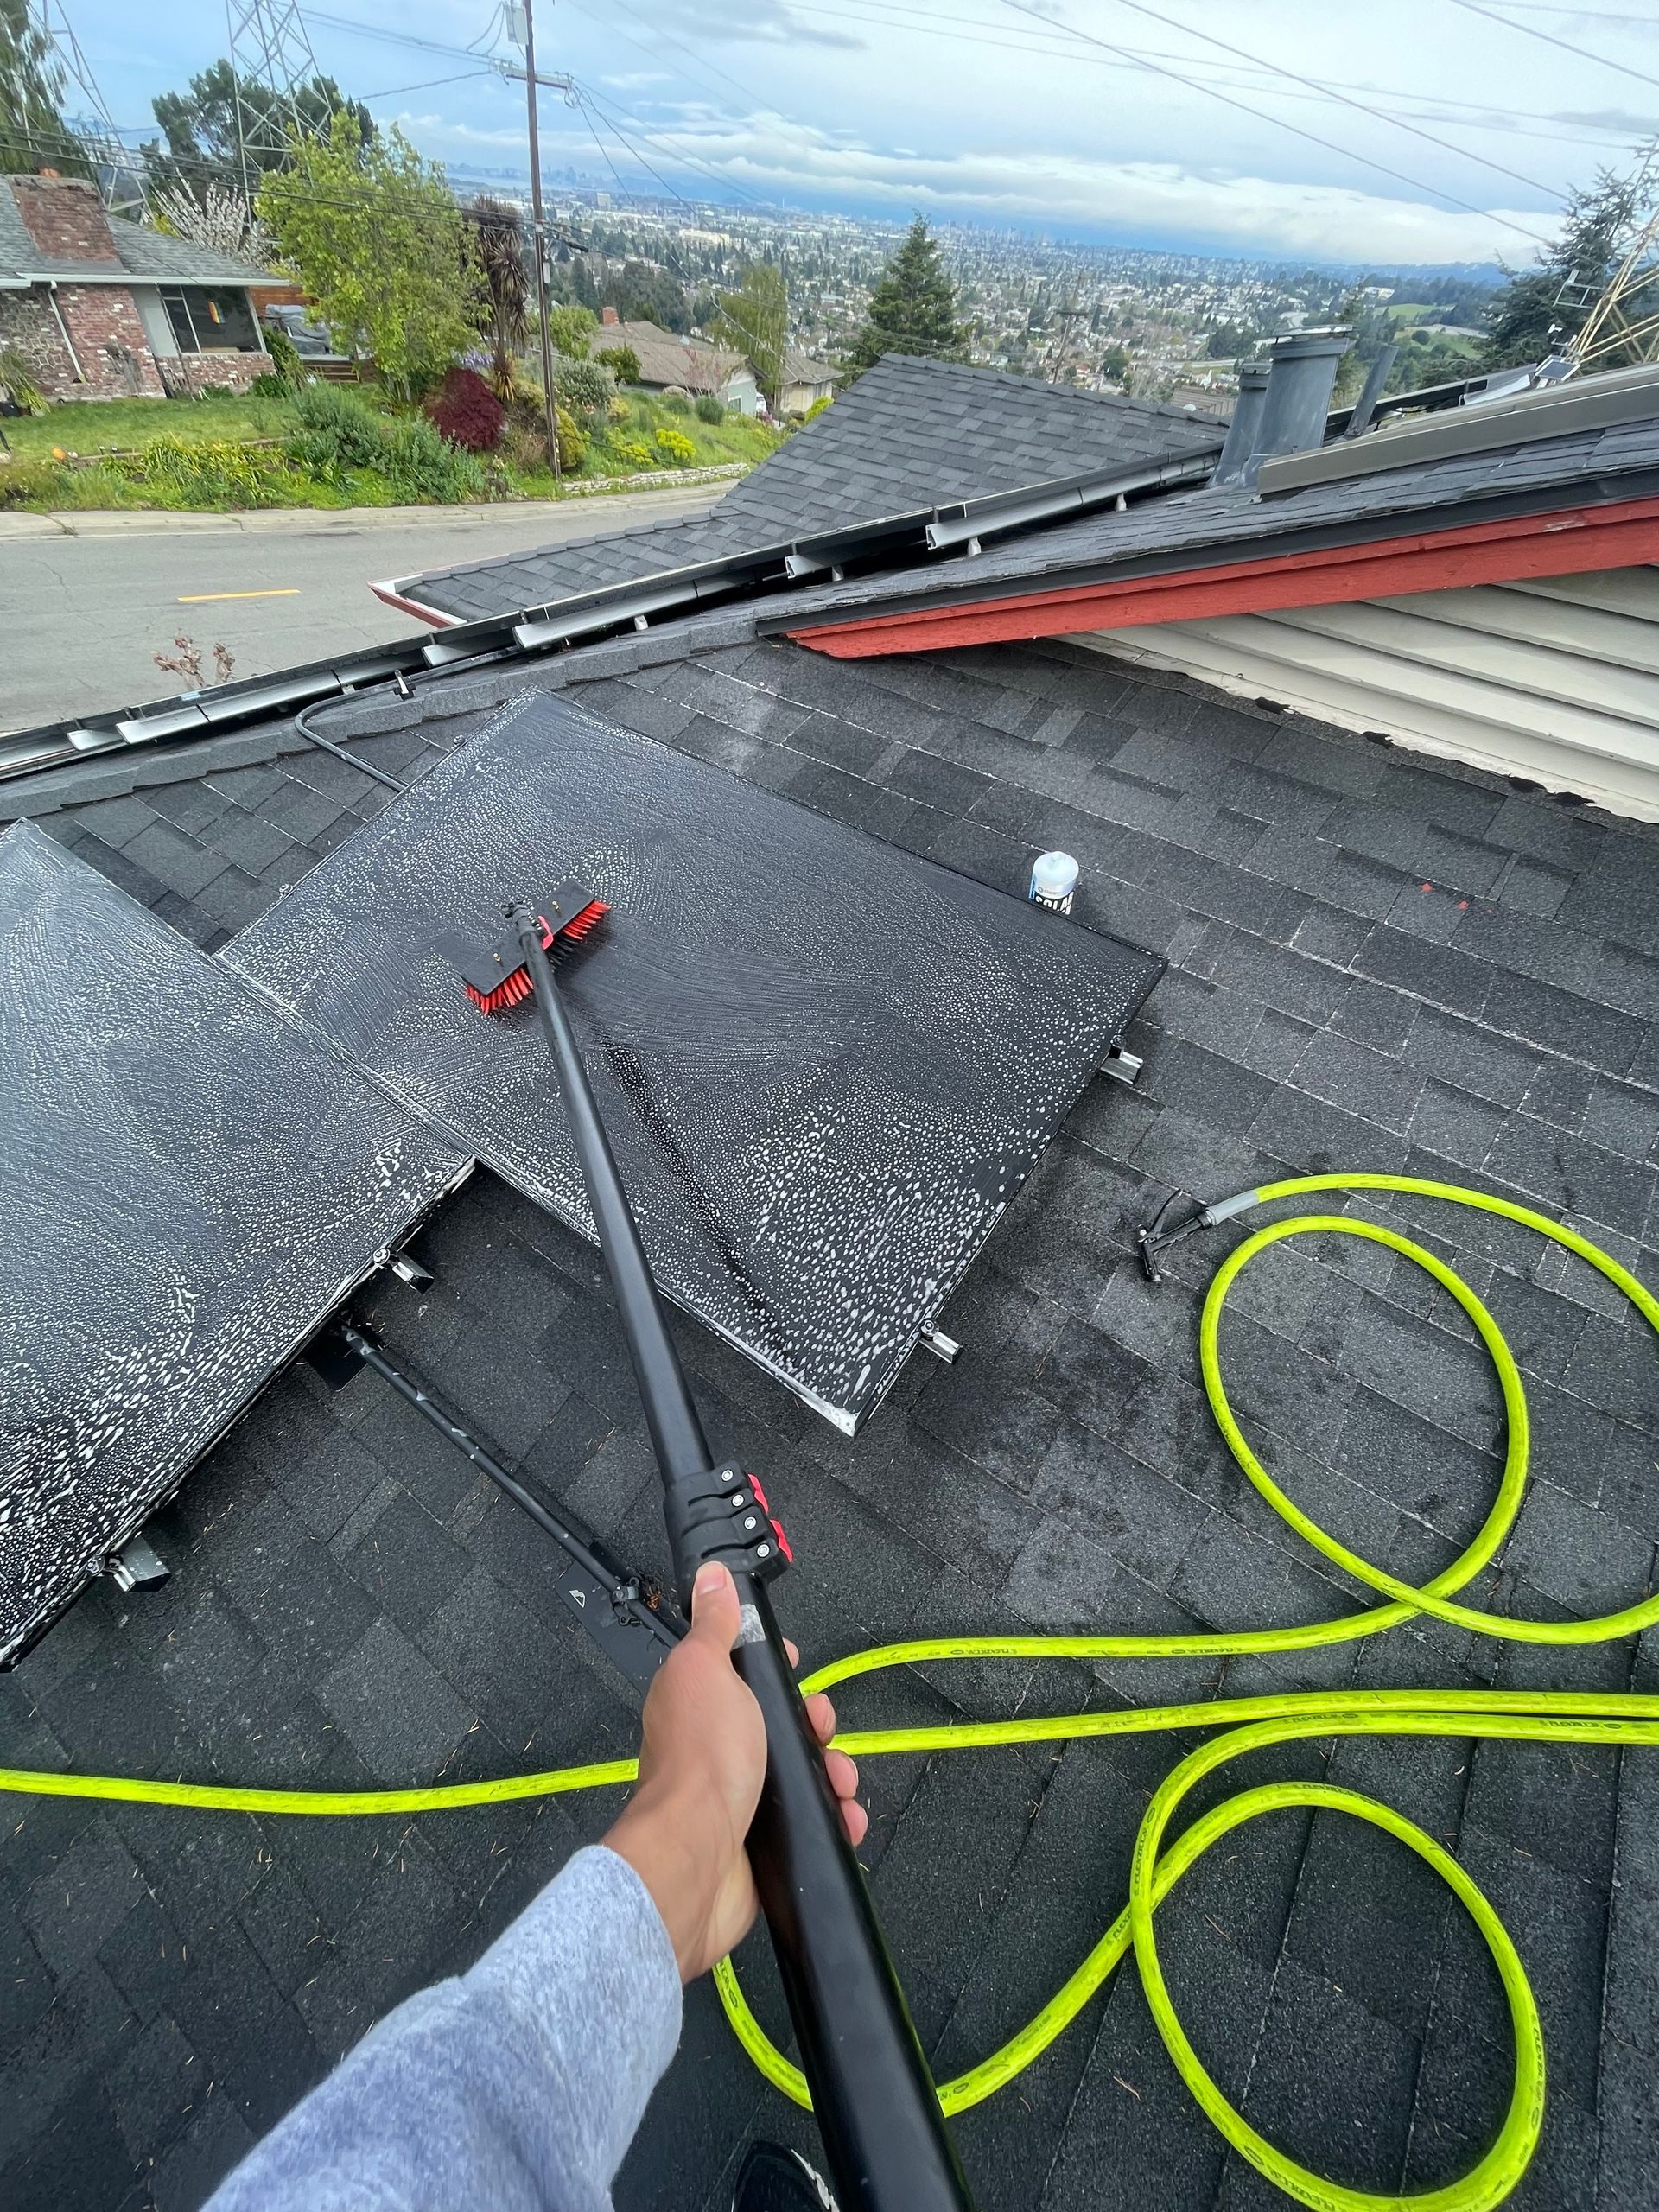 A person is cleaning the roof of a house with a hose.